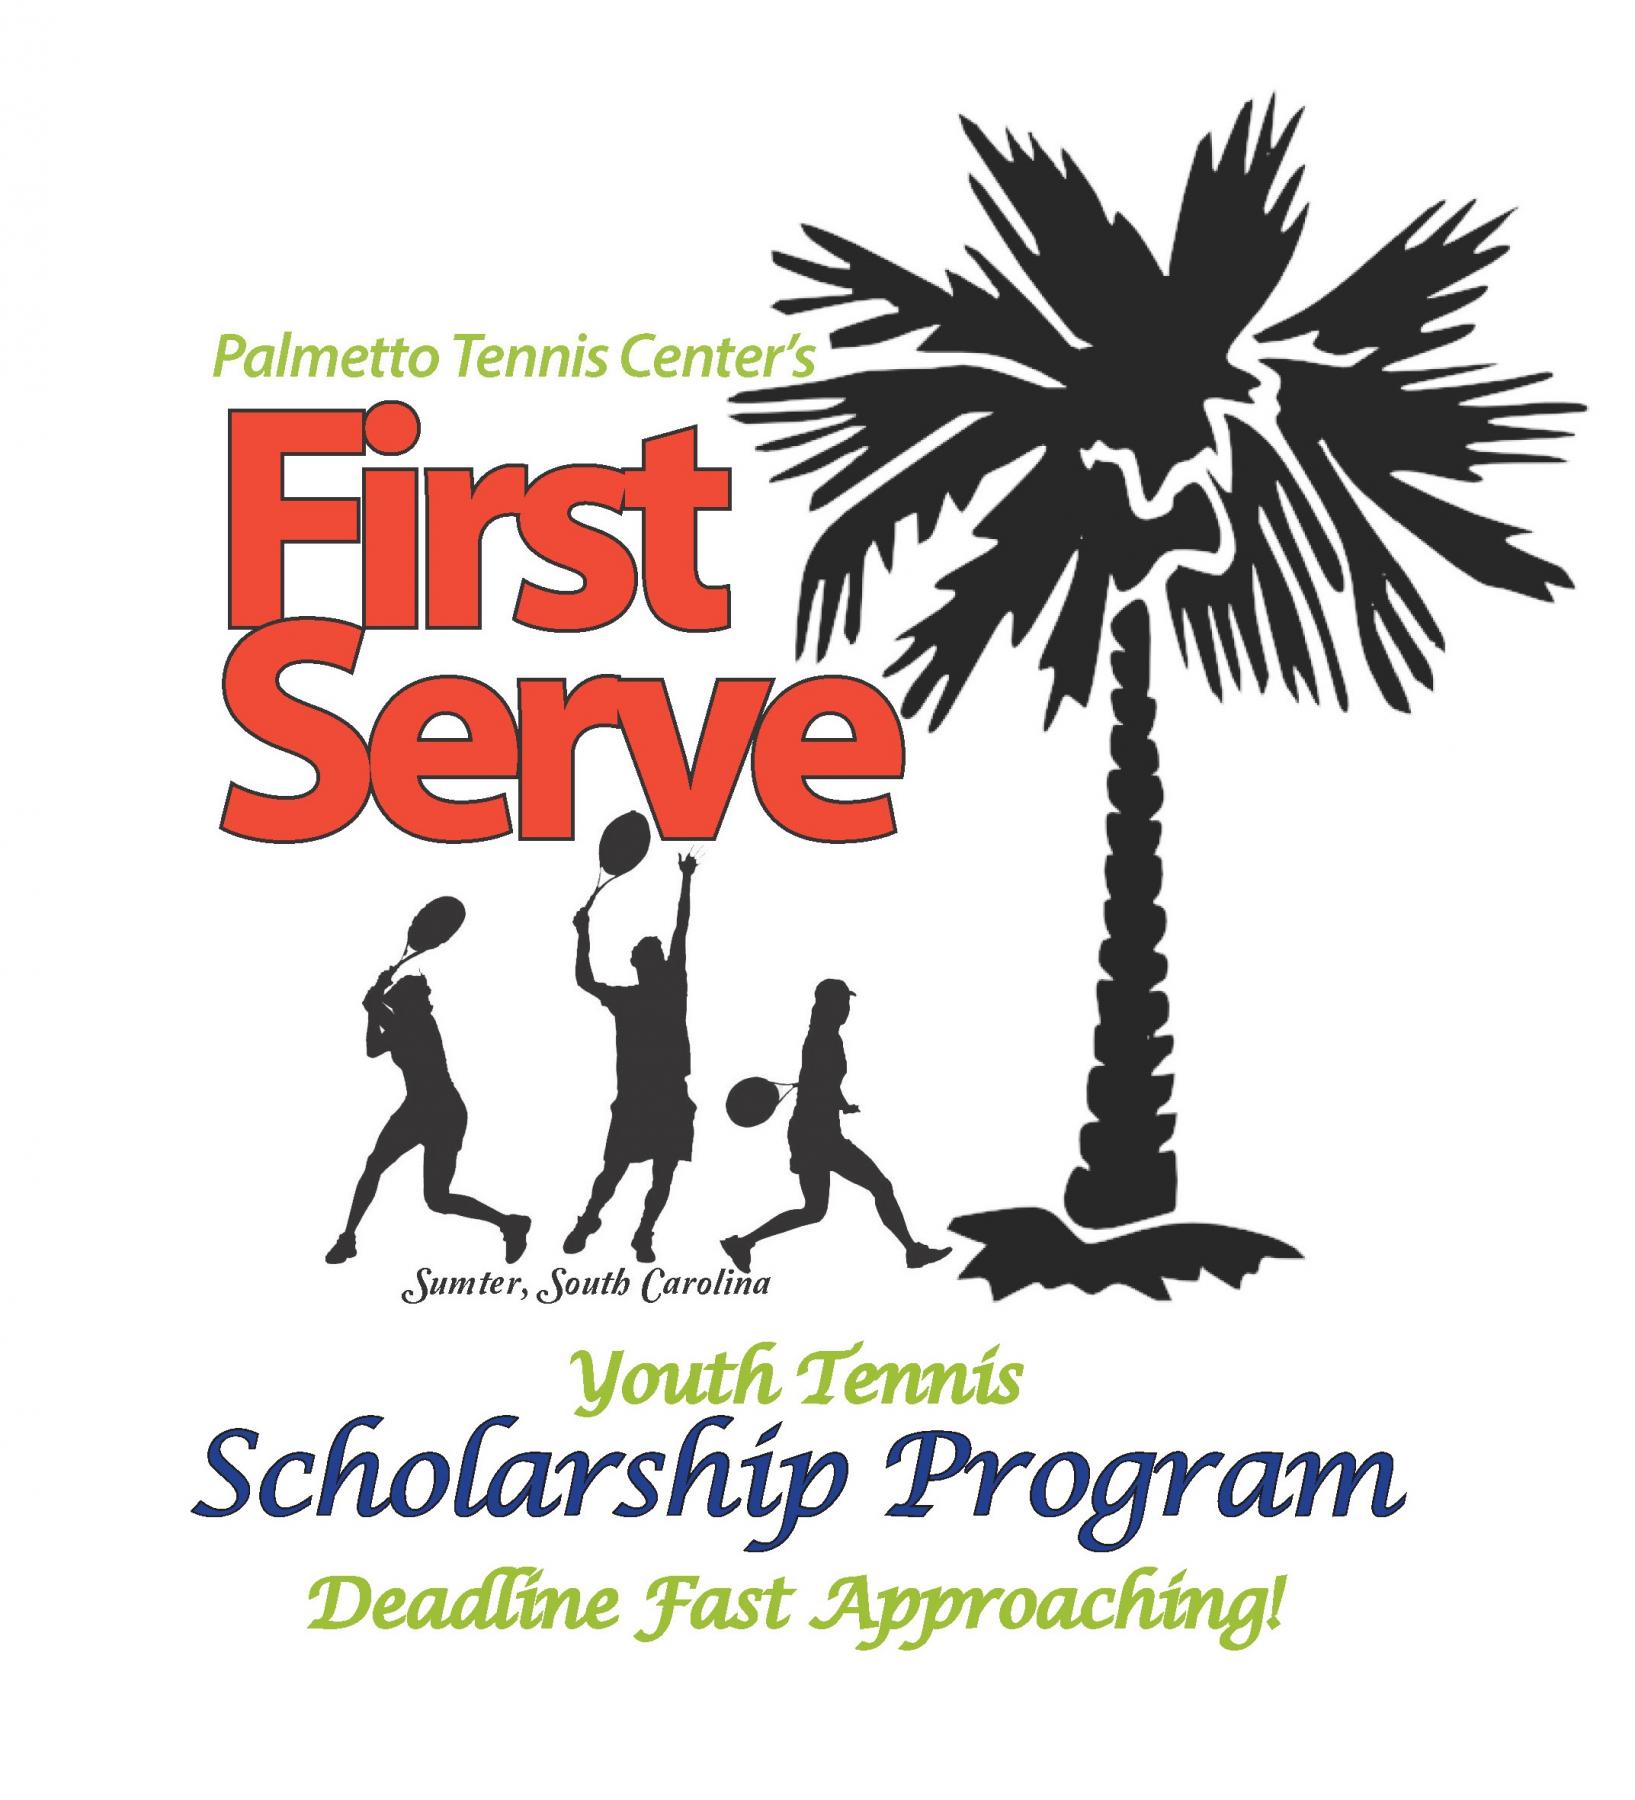 First Serve Applications Accepted through May 22, 2021